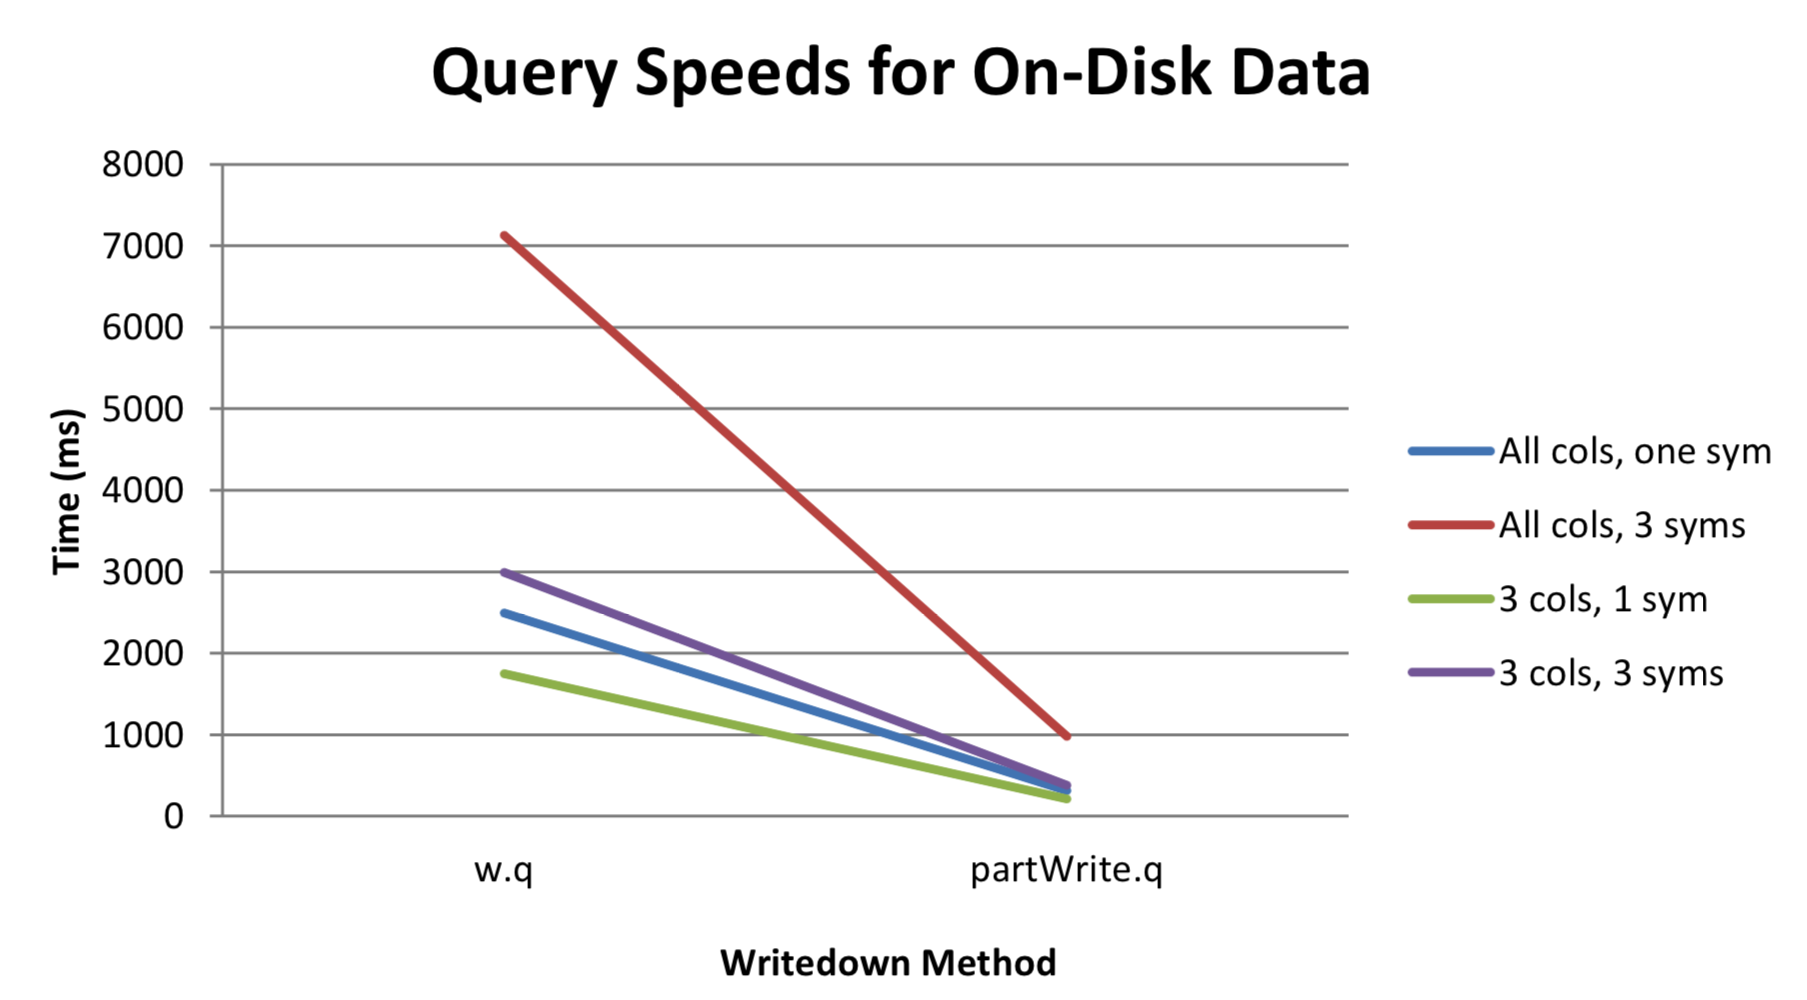 Figure 3: Query speeds for on-disk data